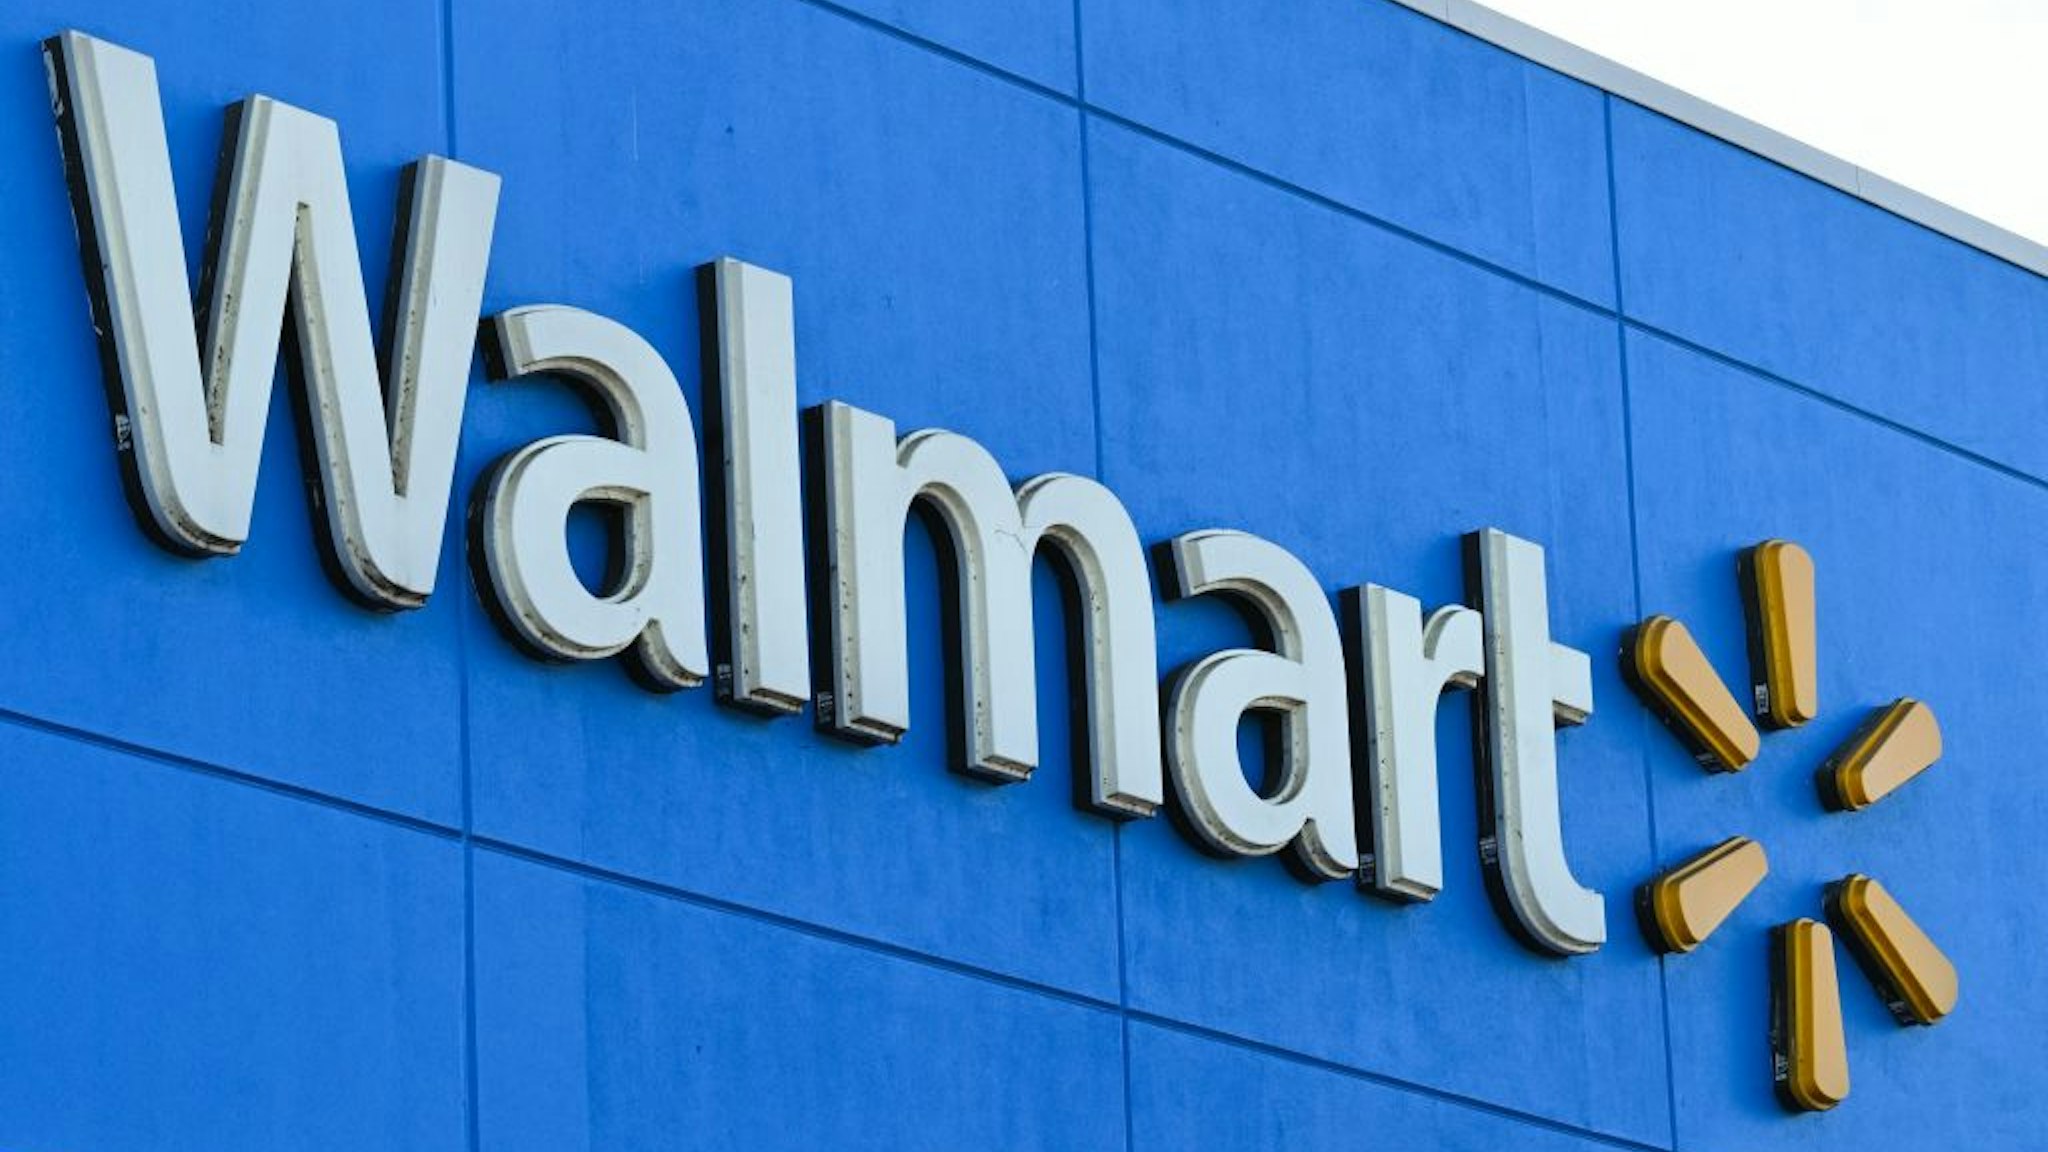 The Walmart logo is seen outside a Walmart store in Burbank, California on August 15, 2022. - Walmart, the largest retailer the United States, will report second quarter earnings on August 16, 2022. (Photo by Robyn Beck / AFP) (